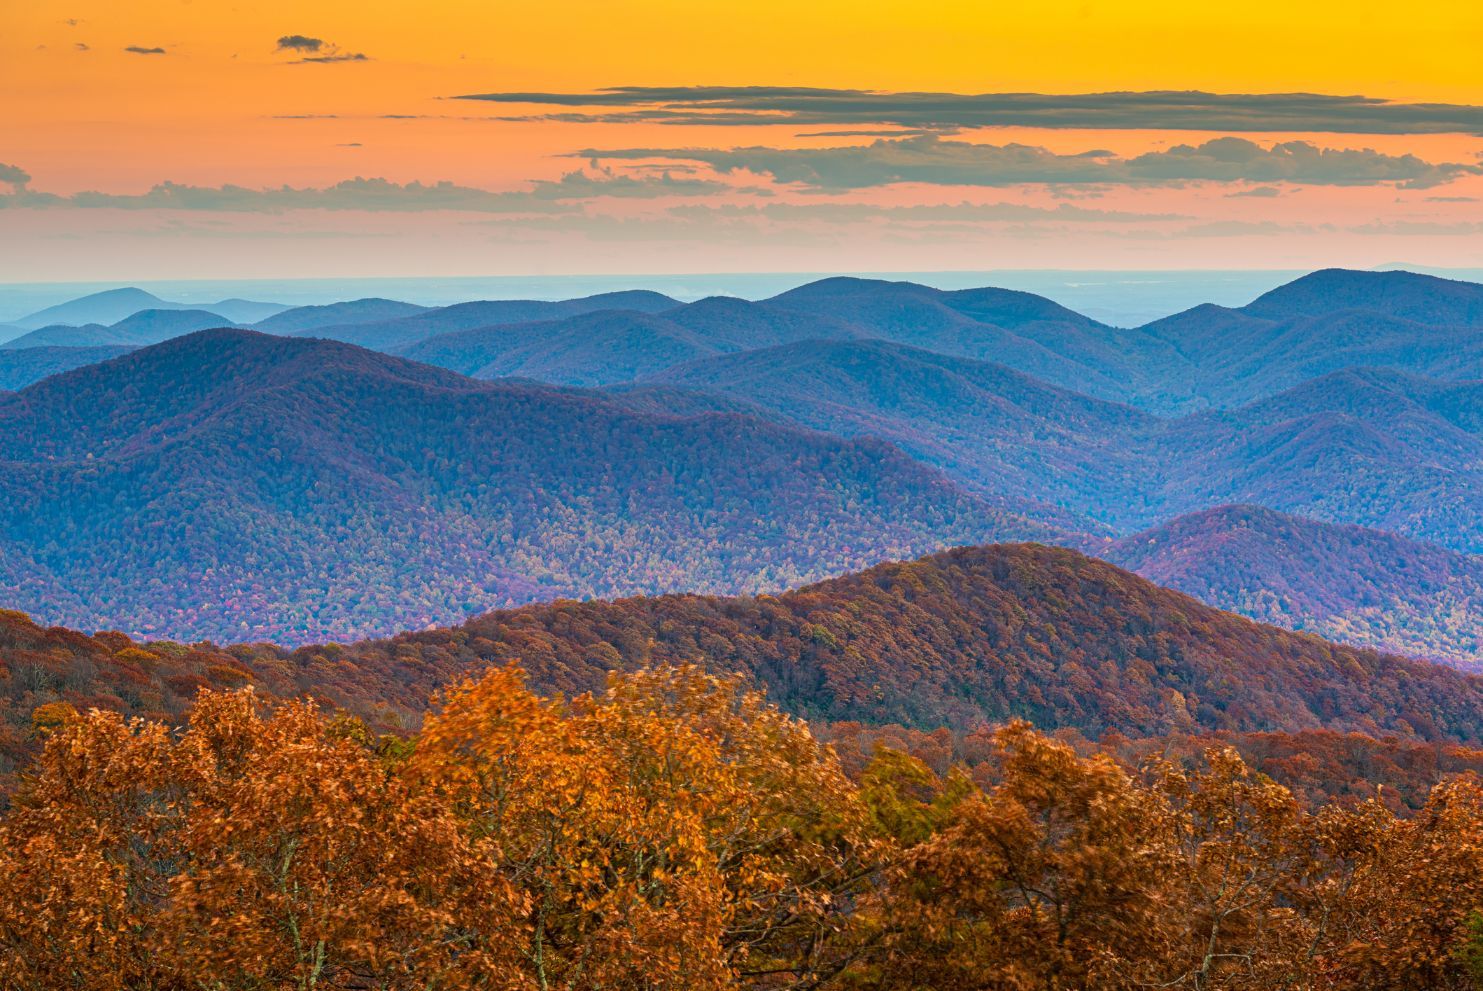 A stunning sunset over the Blue Ridge Mountains, at sunset in North Georgia, USA